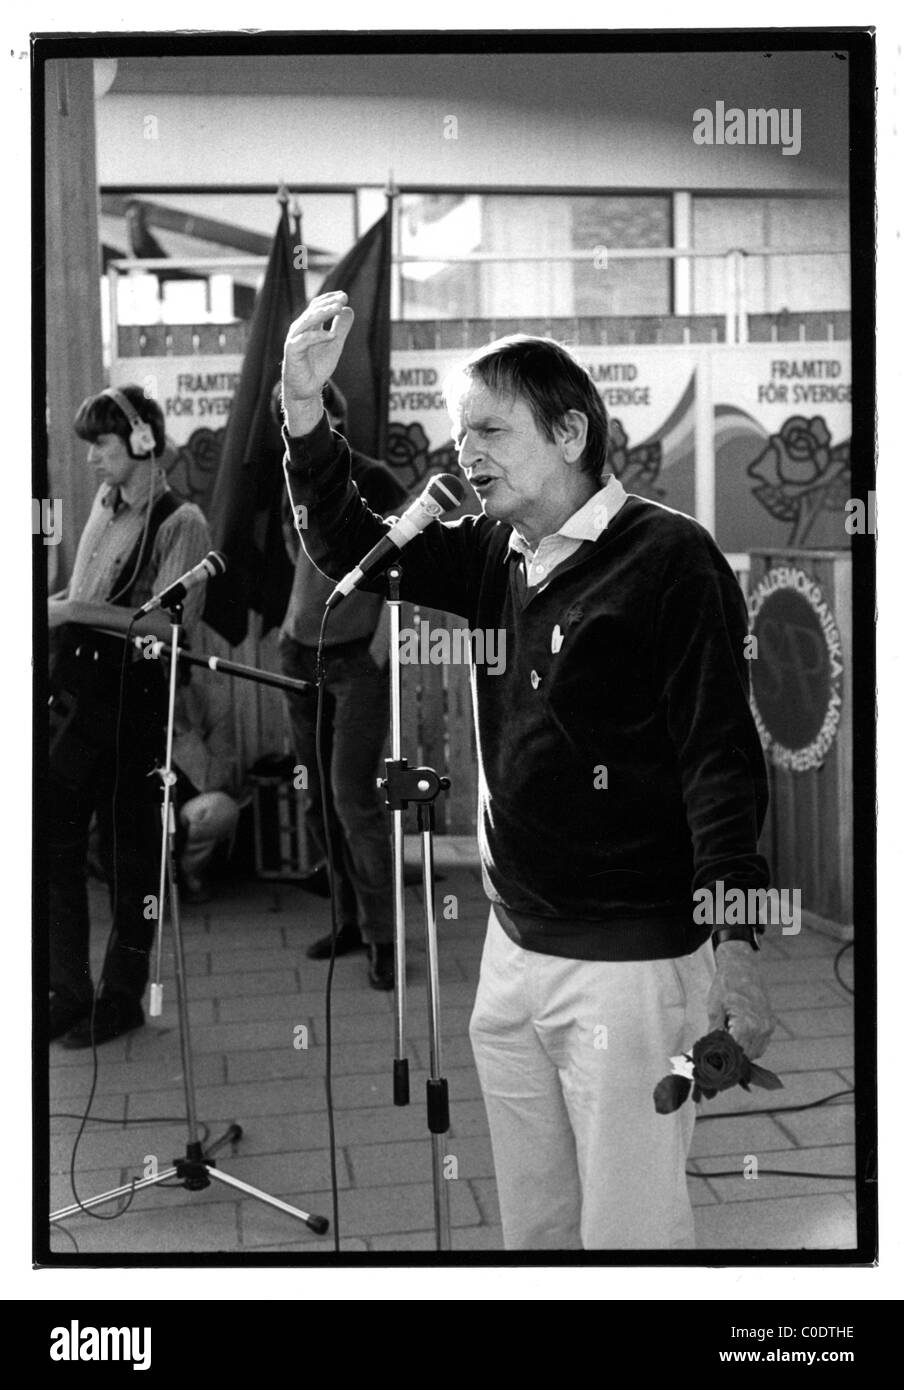 Olof Palme Swedish Prime minister murdered 25 years ago on February 28th 1986 Stock Photo